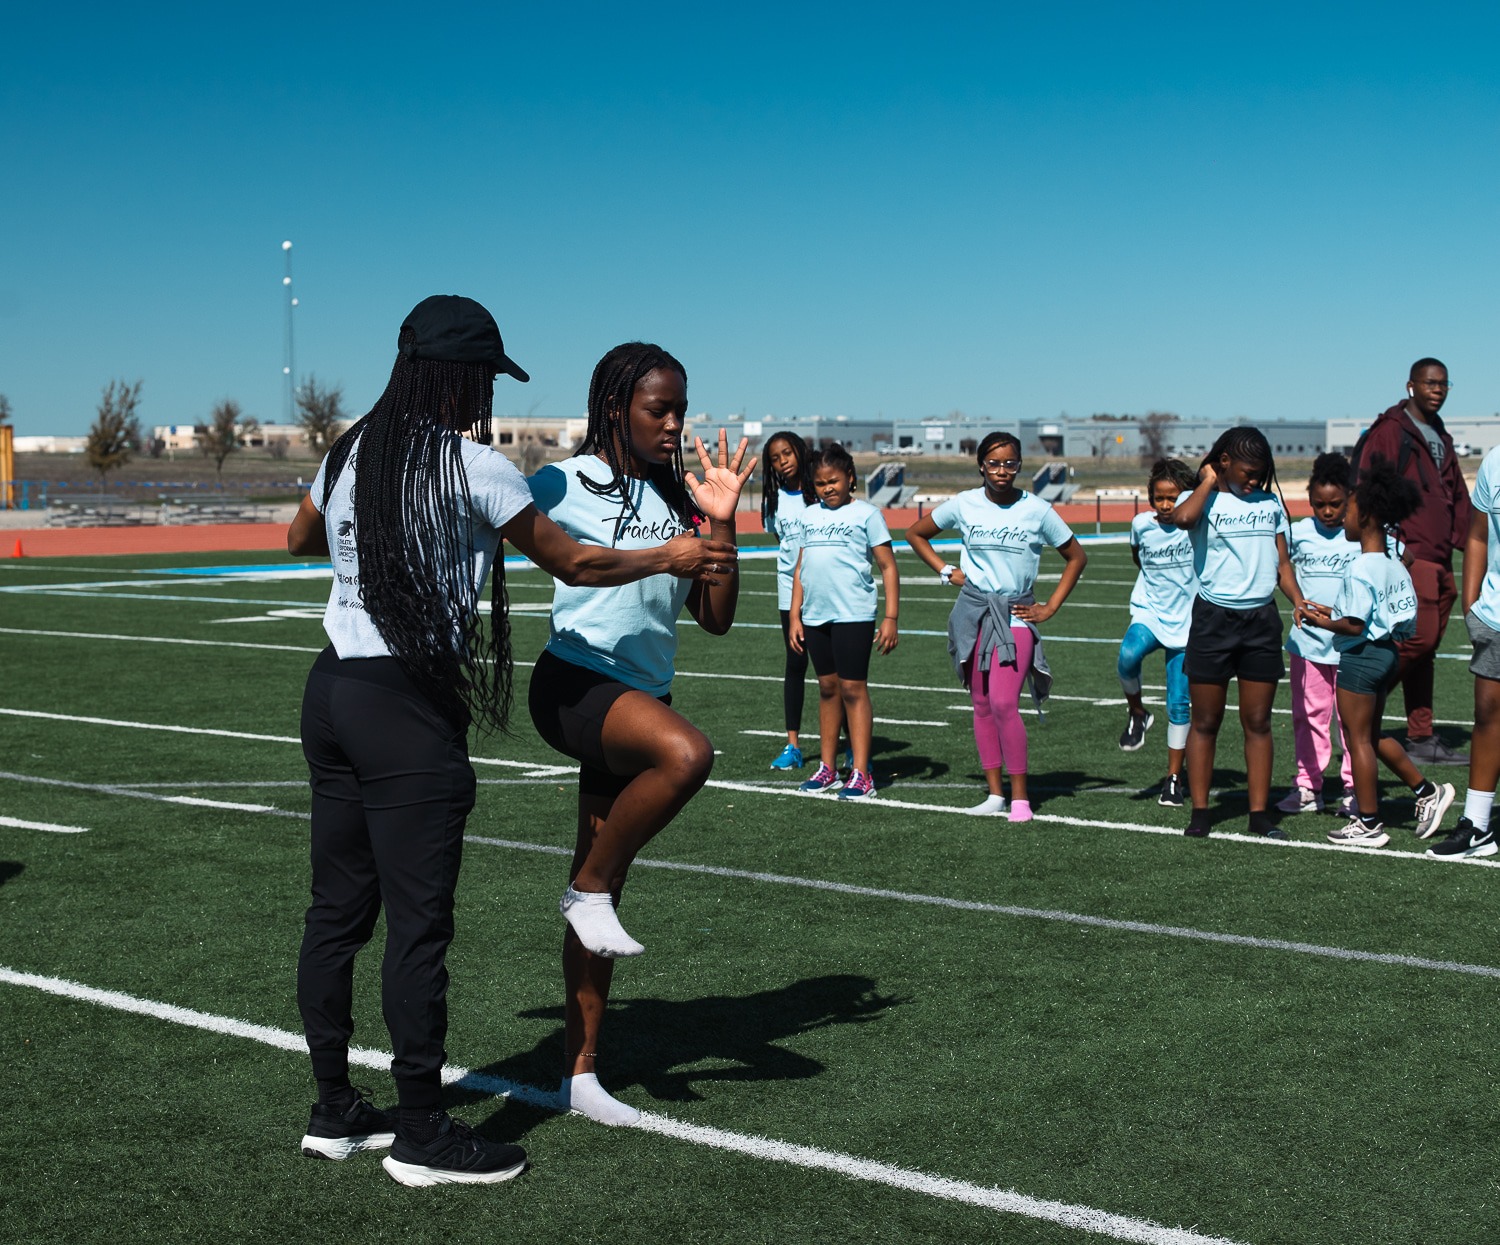 Celebrate National Exercise Day with TrackGirlz: Empowering Girls Through Movement